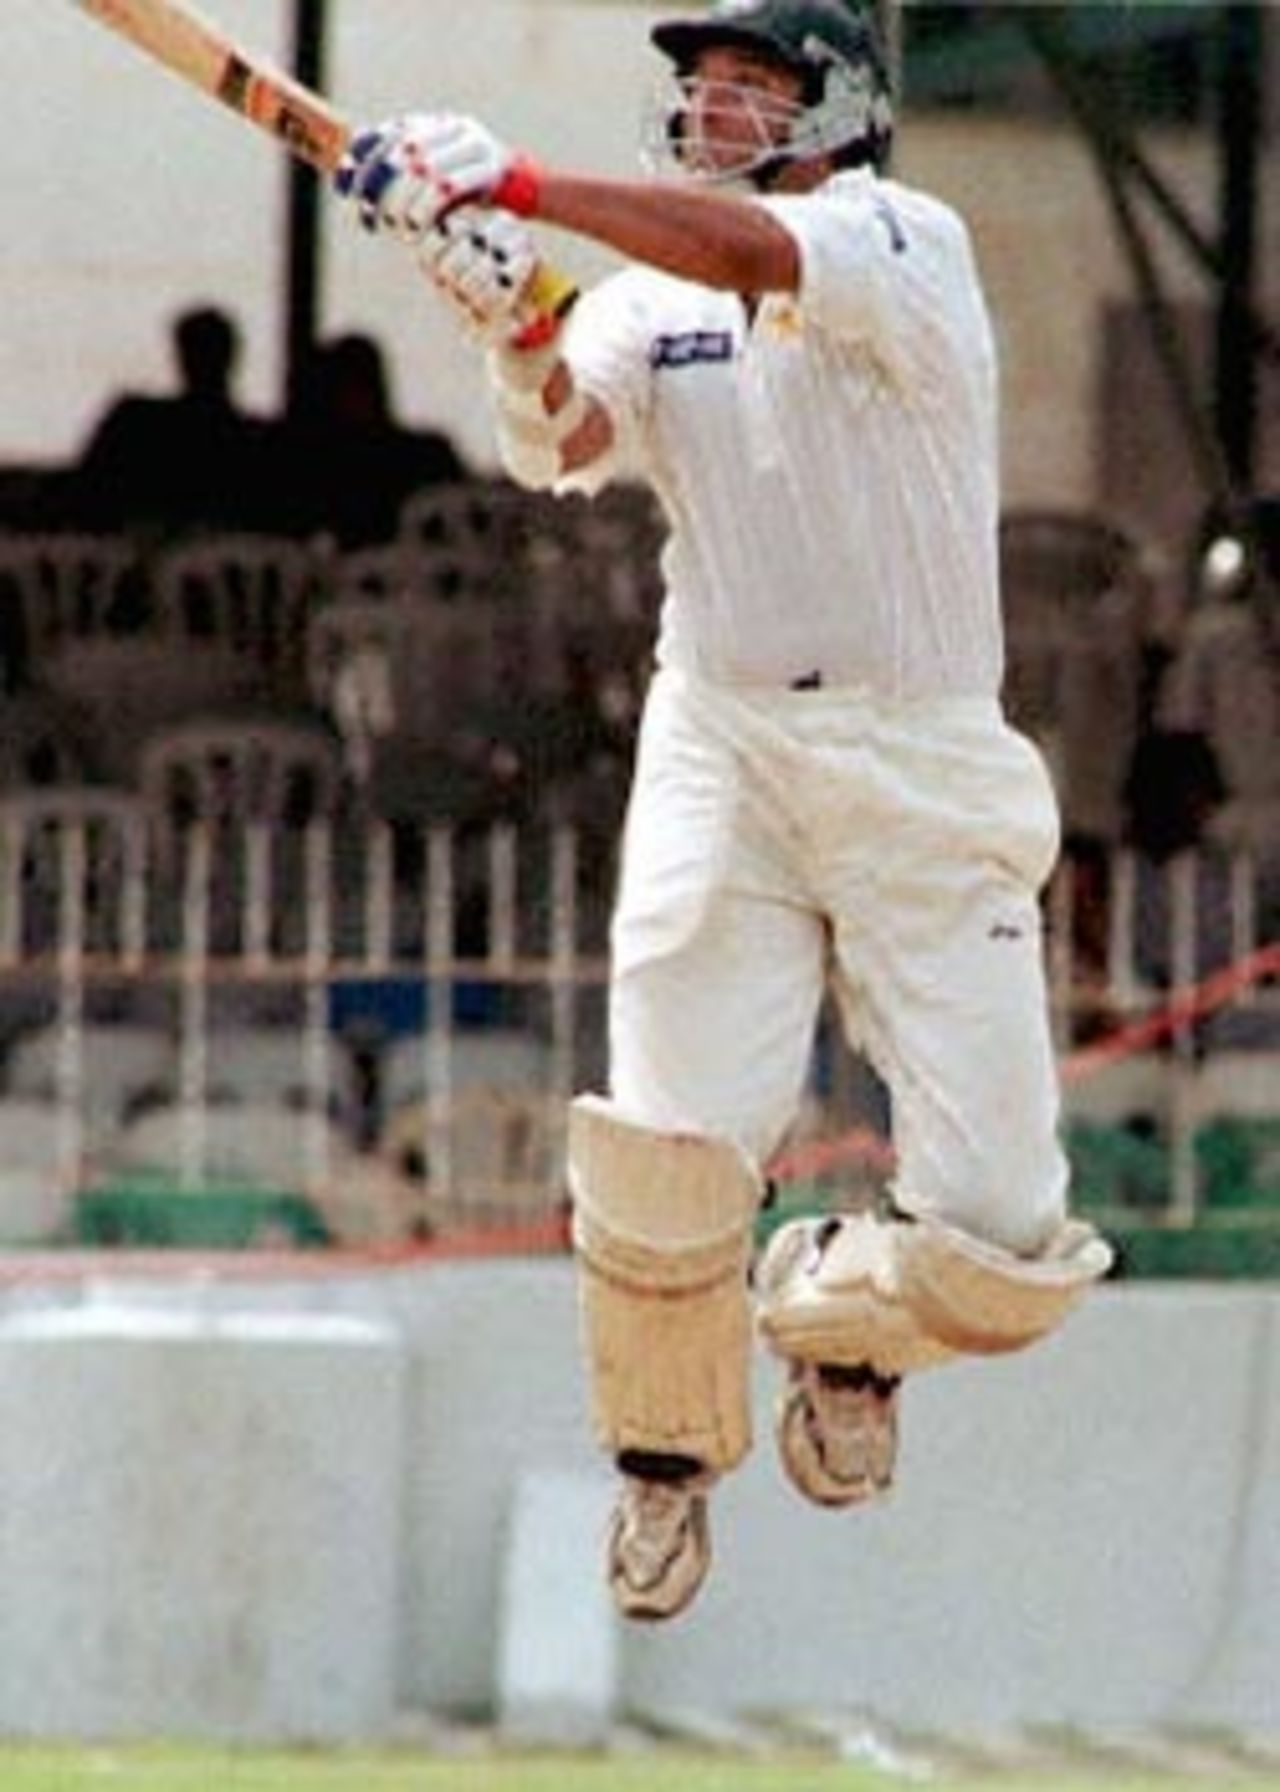 Pakistan's Wasim Akran on his way to score 78 and bring his team's score to 266 in reply to Sri Lanka's 273 in the first innings of their first test. He also took the 400th Test wicket in his career by dismissing Sri Lanka's Russel Arnold for one in Sri Lanka's second innings. Akram joined the world elite of 400 test wicket takers on the third day of the first test against Sri Lanka. Pakistan in Sri Lanka, 1999/00, 1st Test, Sri Lanka v Pakistan, Sinhalese Sports Club Ground, Colombo, 14-18 June 2000 (Day 3).